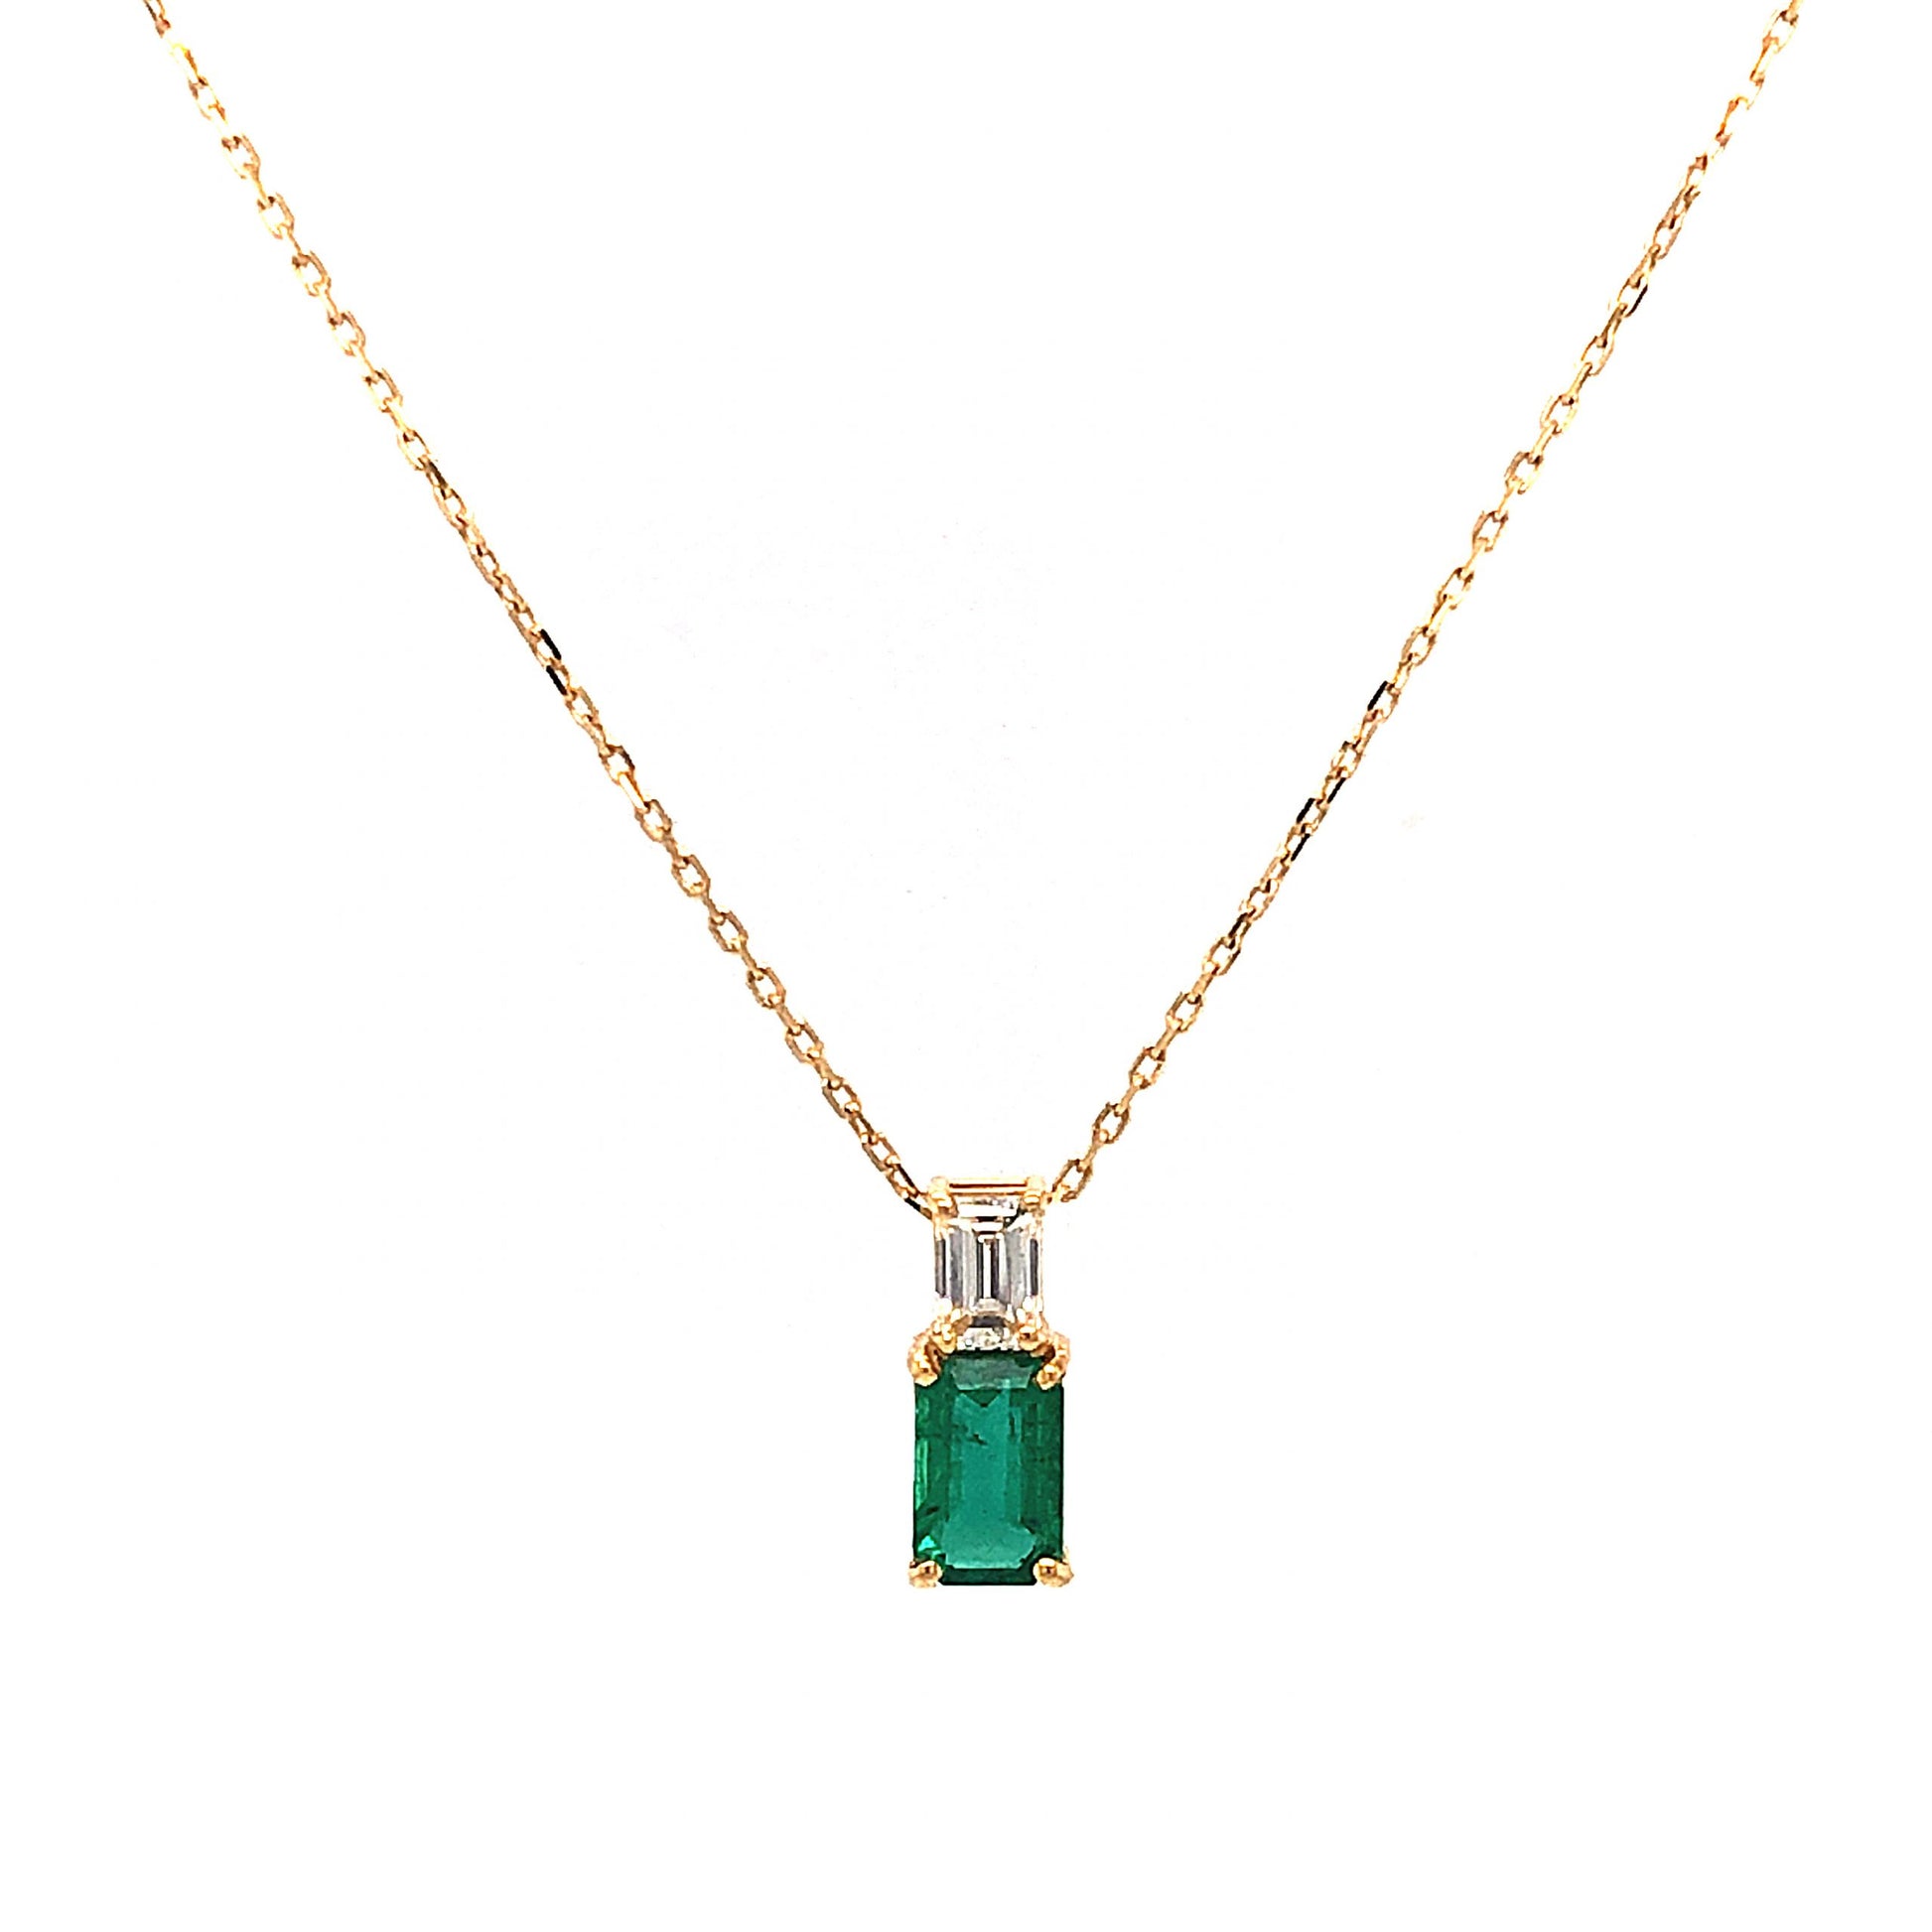 Stacked Emerald & Diamond Pendant Necklace in 18k Yellow GoldComposition: 18 Karat Yellow GoldTotal Diamond Weight: .19 ctTotal Gram Weight: 2.0 gInscription: 750 18Kt ITALY